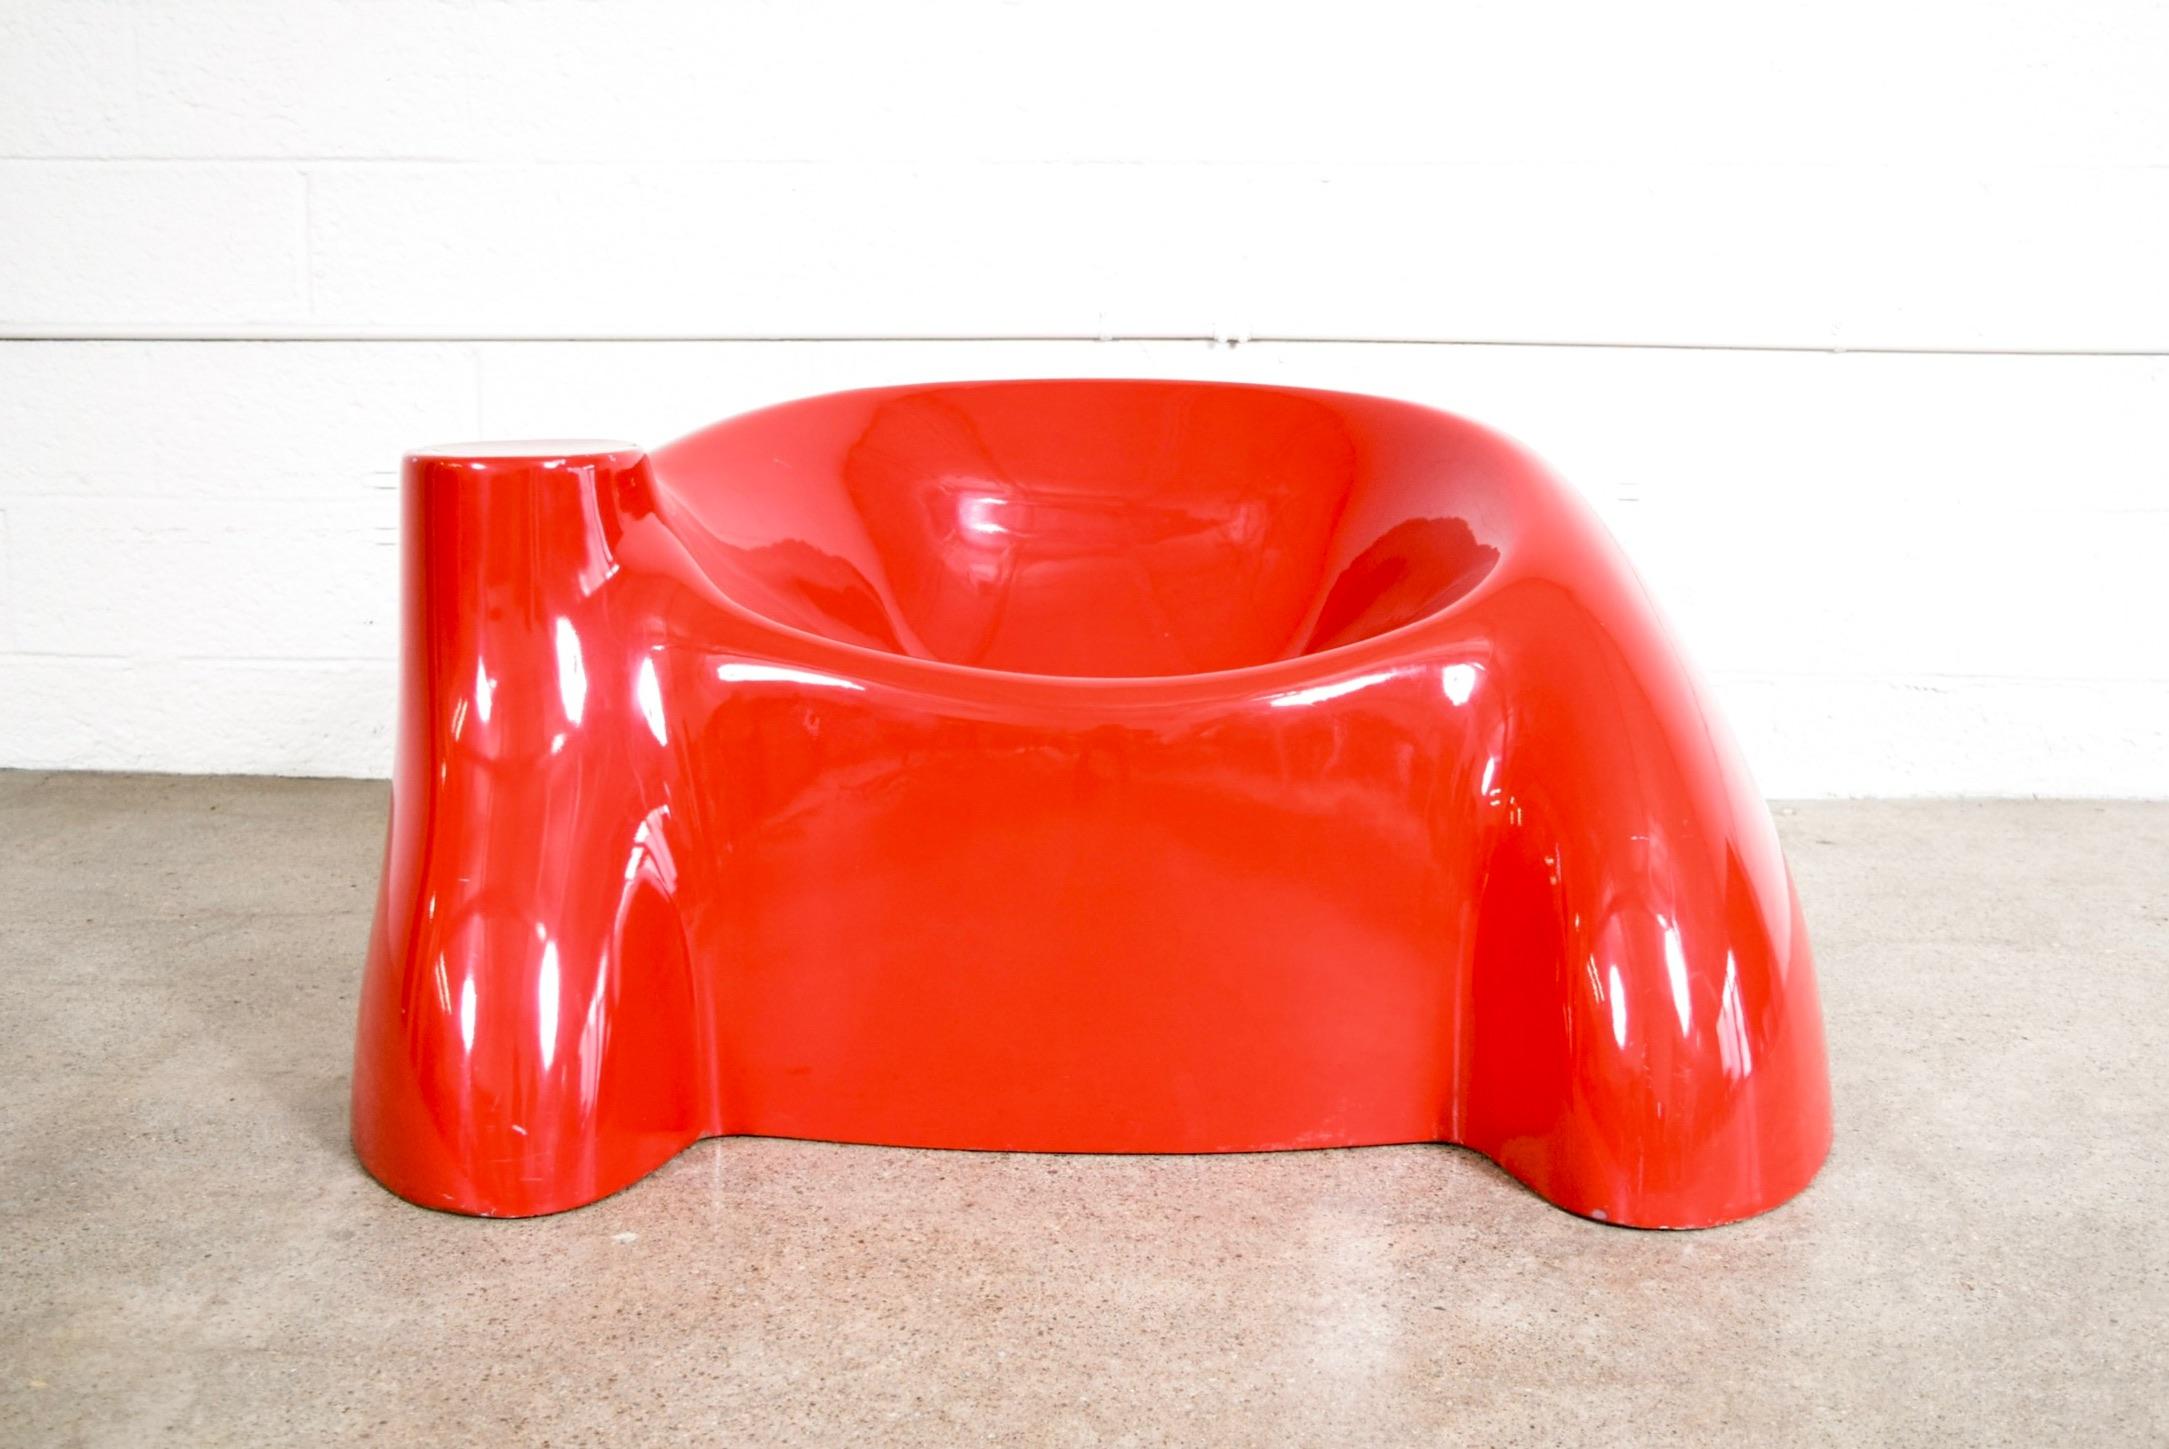 This striking Wendell Castle lounge chair was designed and produced, circa 1970. Similar to Castle’s Molar chair, the whimsical, organic sculptural form is a signature of his playful design. It is constructed from molded fiberglass with a